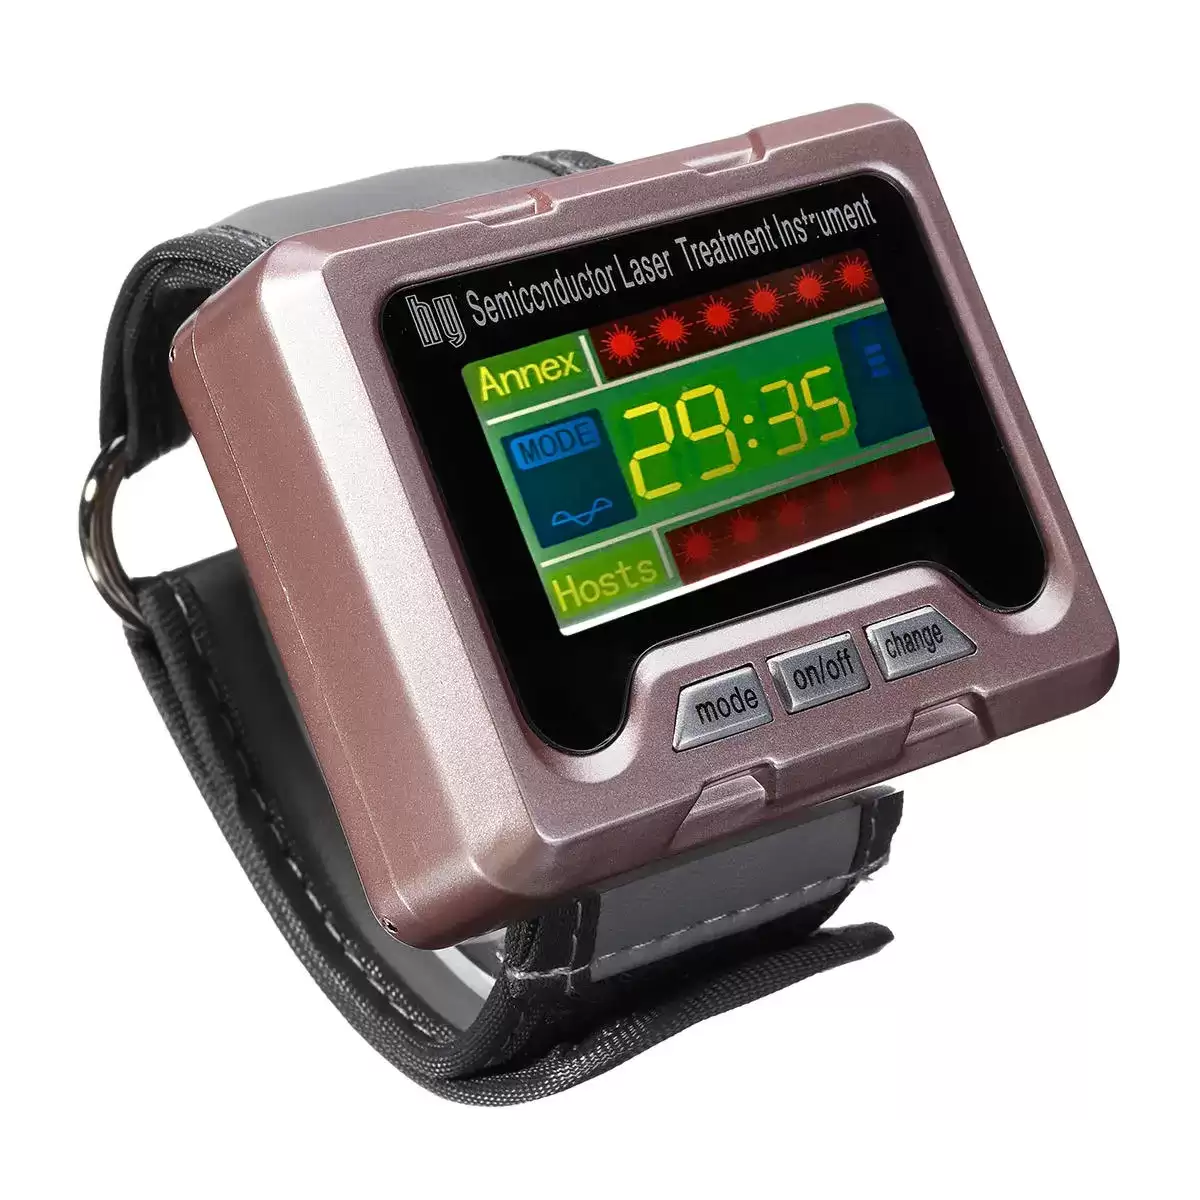 Order In Just $26.99 650nm Laser Therapy Wrist Apparatus High Blood Pressure Watch Monitor High Fat Blood With This Coupon At Banggood